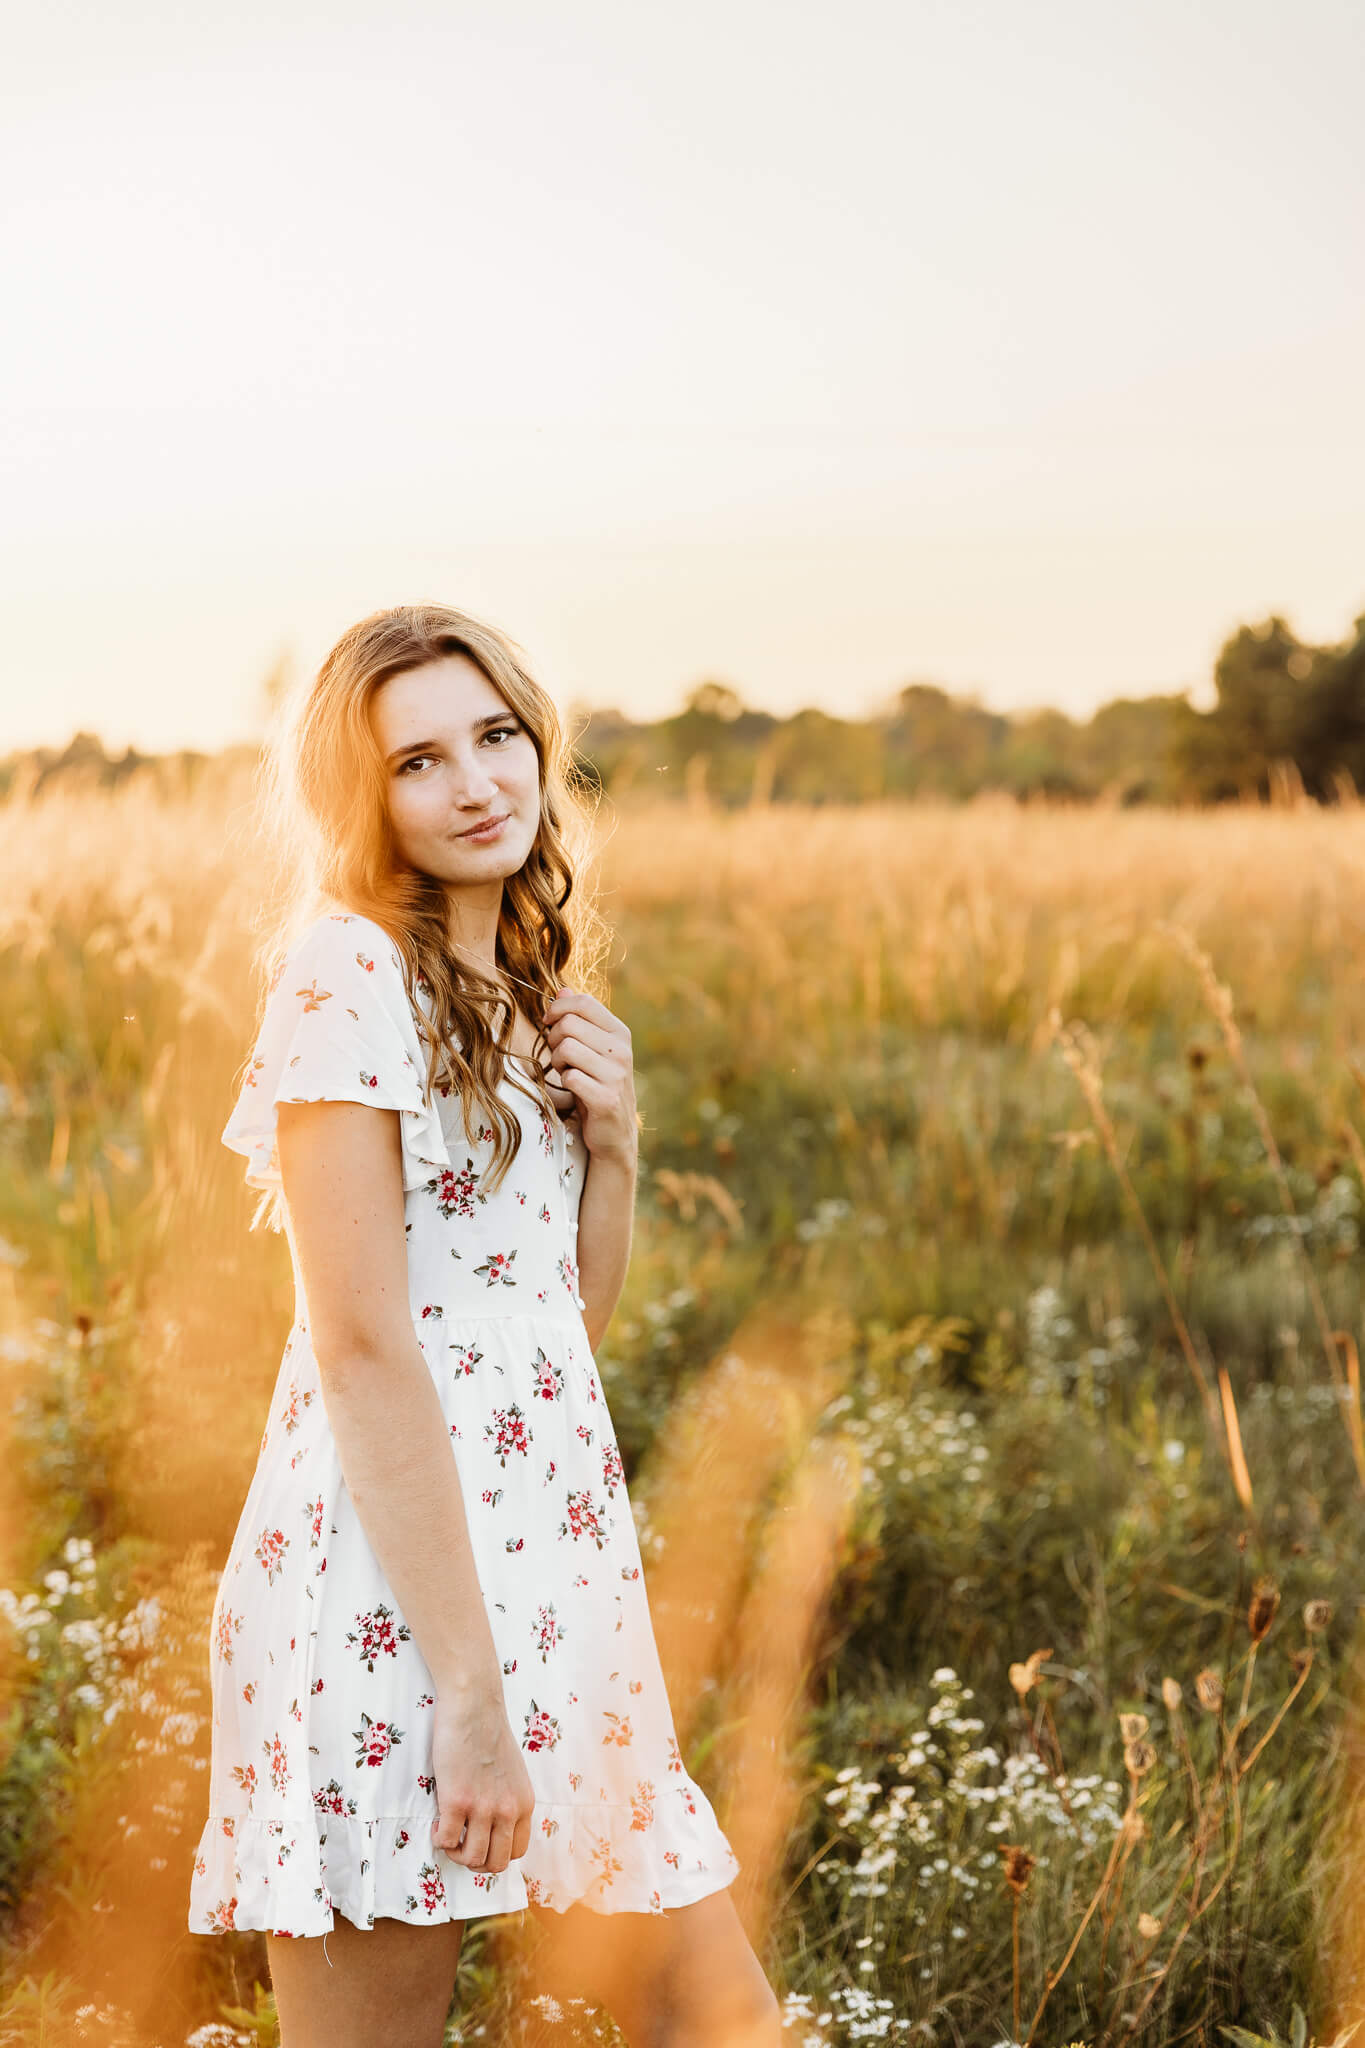 high school girl in a white dress standing in a grassy field at golden hour for blog post about universities in wisconsin